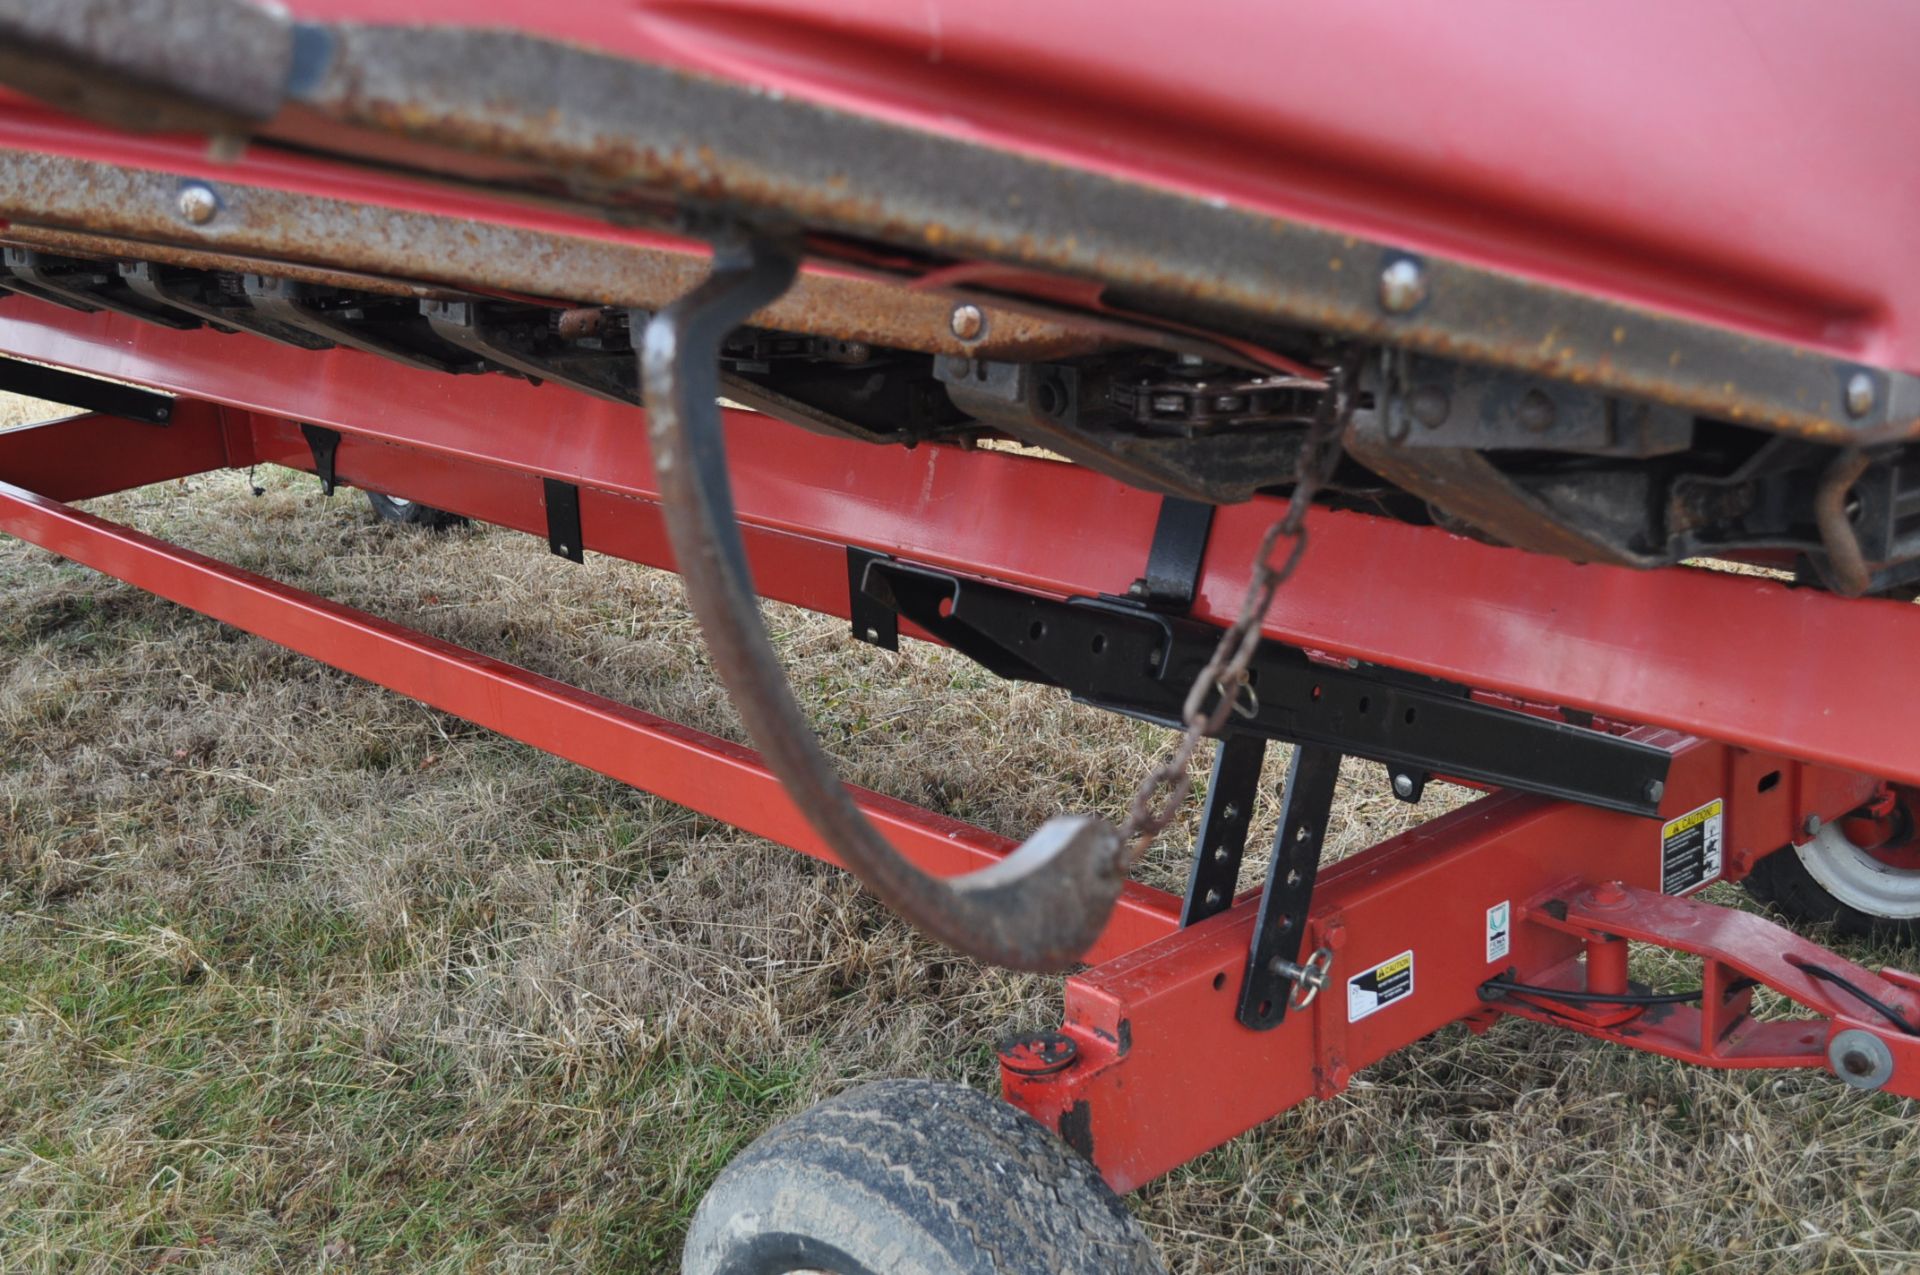 CASE IH 2208 Poly Corn Head, 8 rows x 30”, hyd deck plates, knife rolls, poly, 3 header height - Image 8 of 16